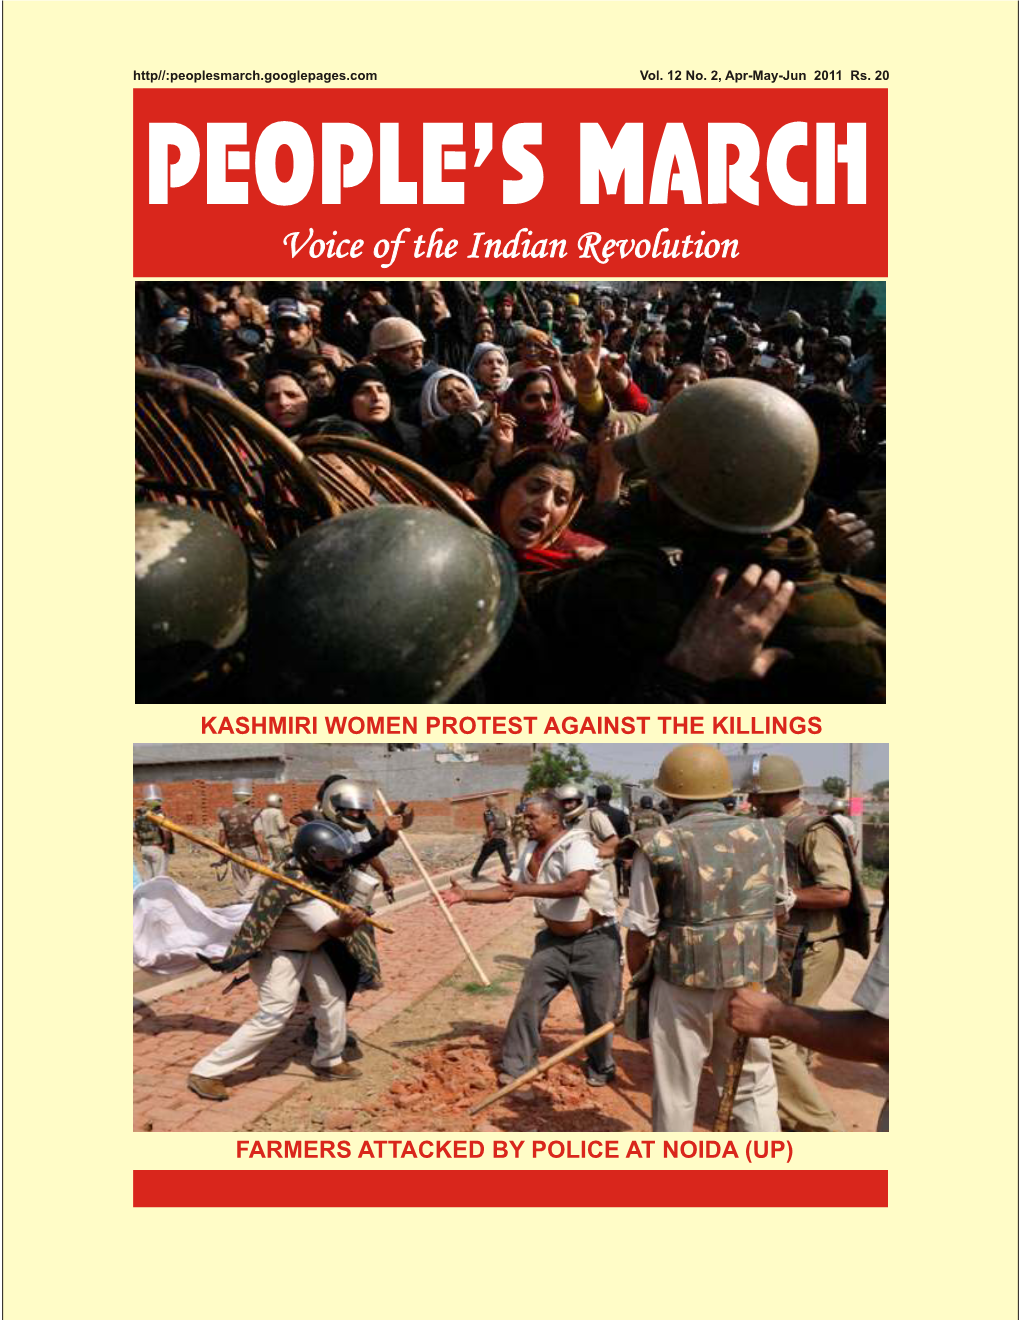 F:\Peoples March Apr-May-Jun 20